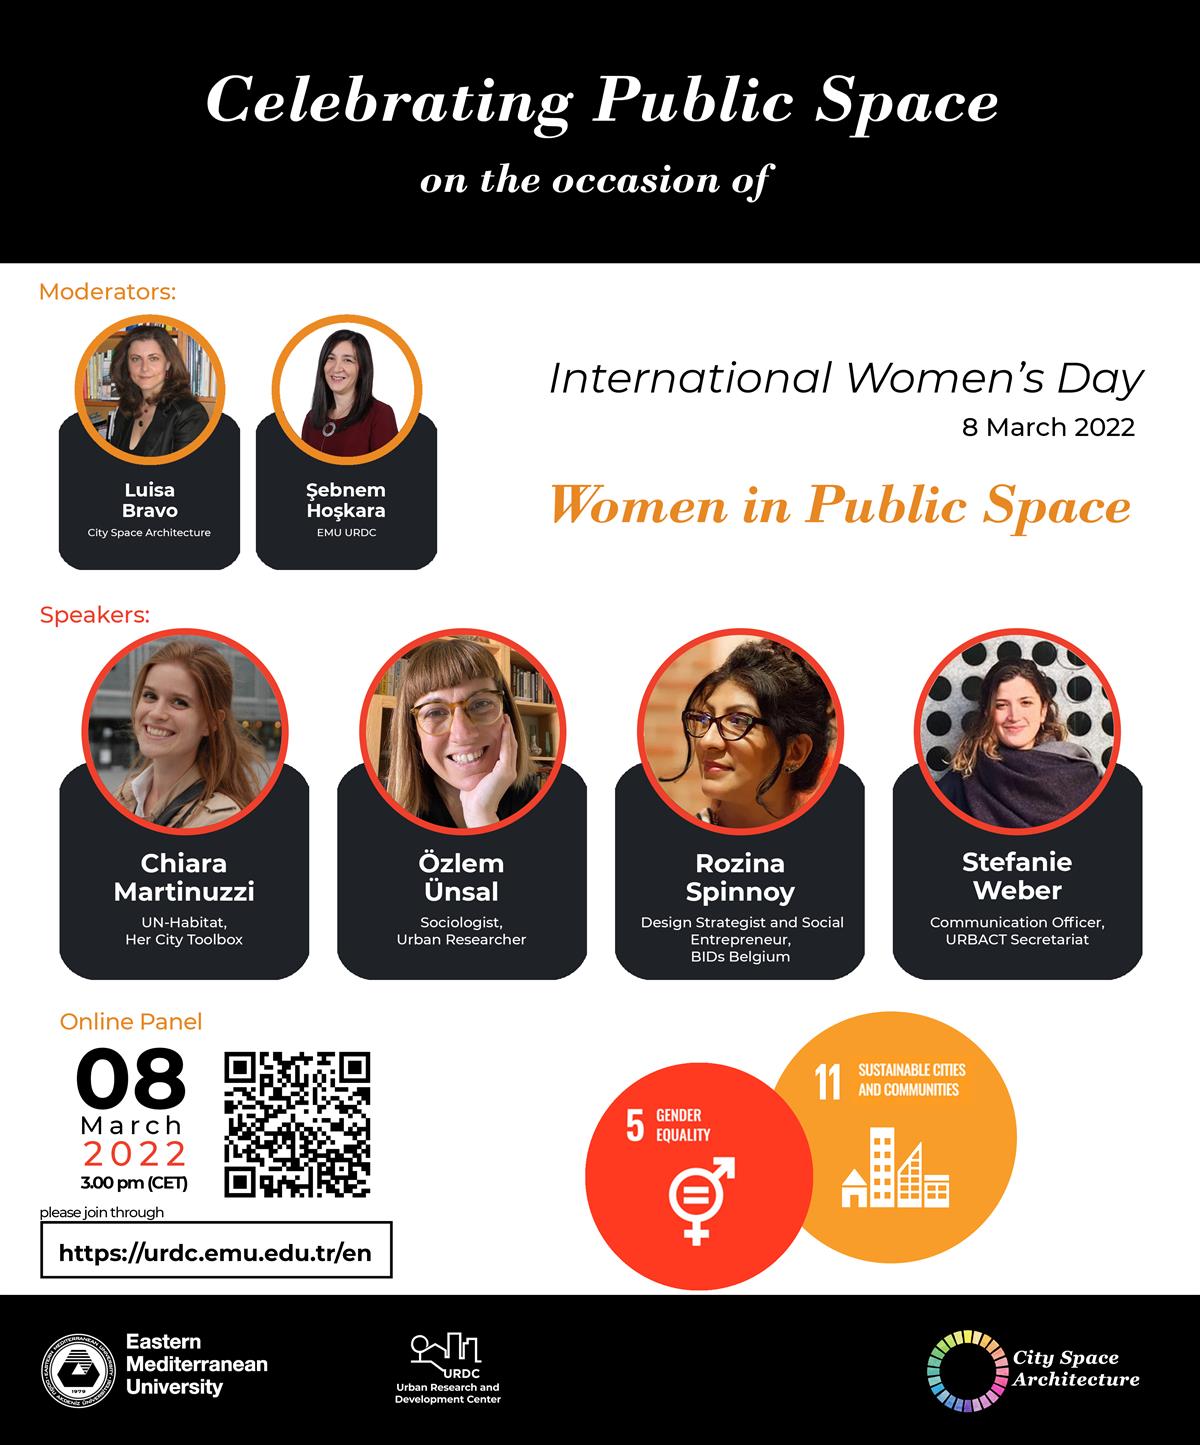 Celebrating Public Space on the Occasion of International Women